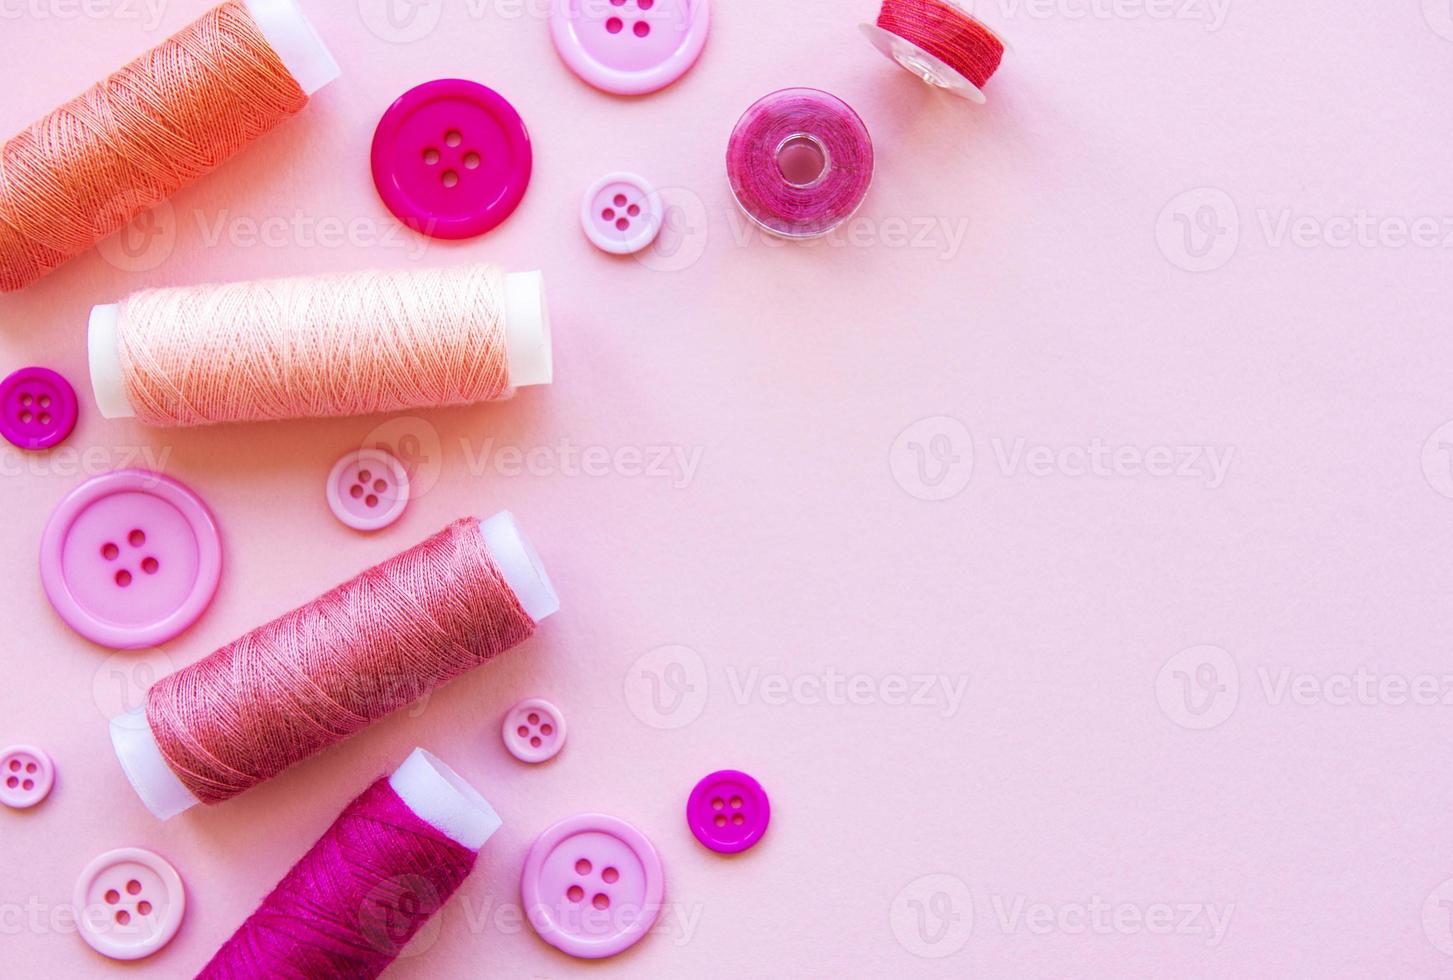 Spools of thread and buttons in pink tones on a pink background photo